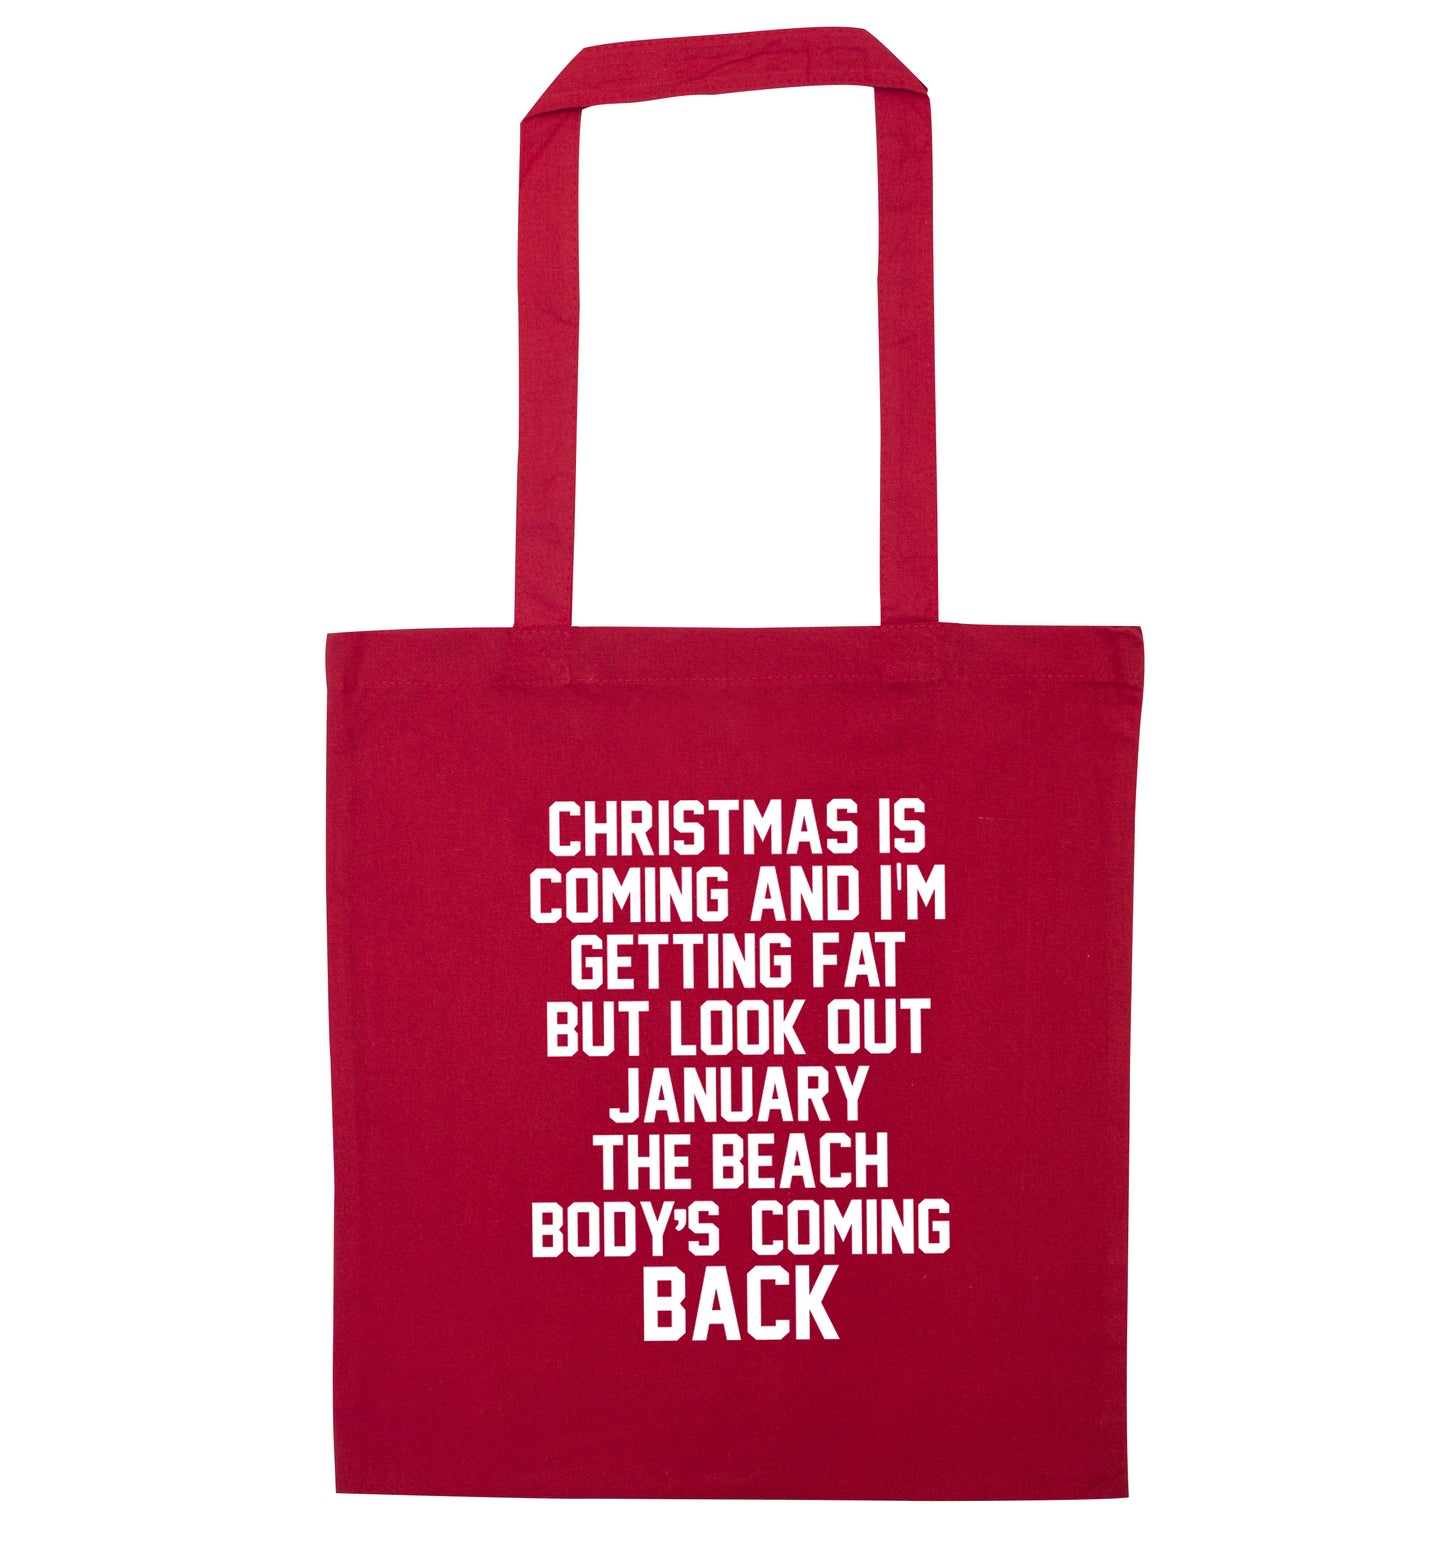 Christmas is coming and I'm getting fat but look out January the beach body's coming back! red tote bag